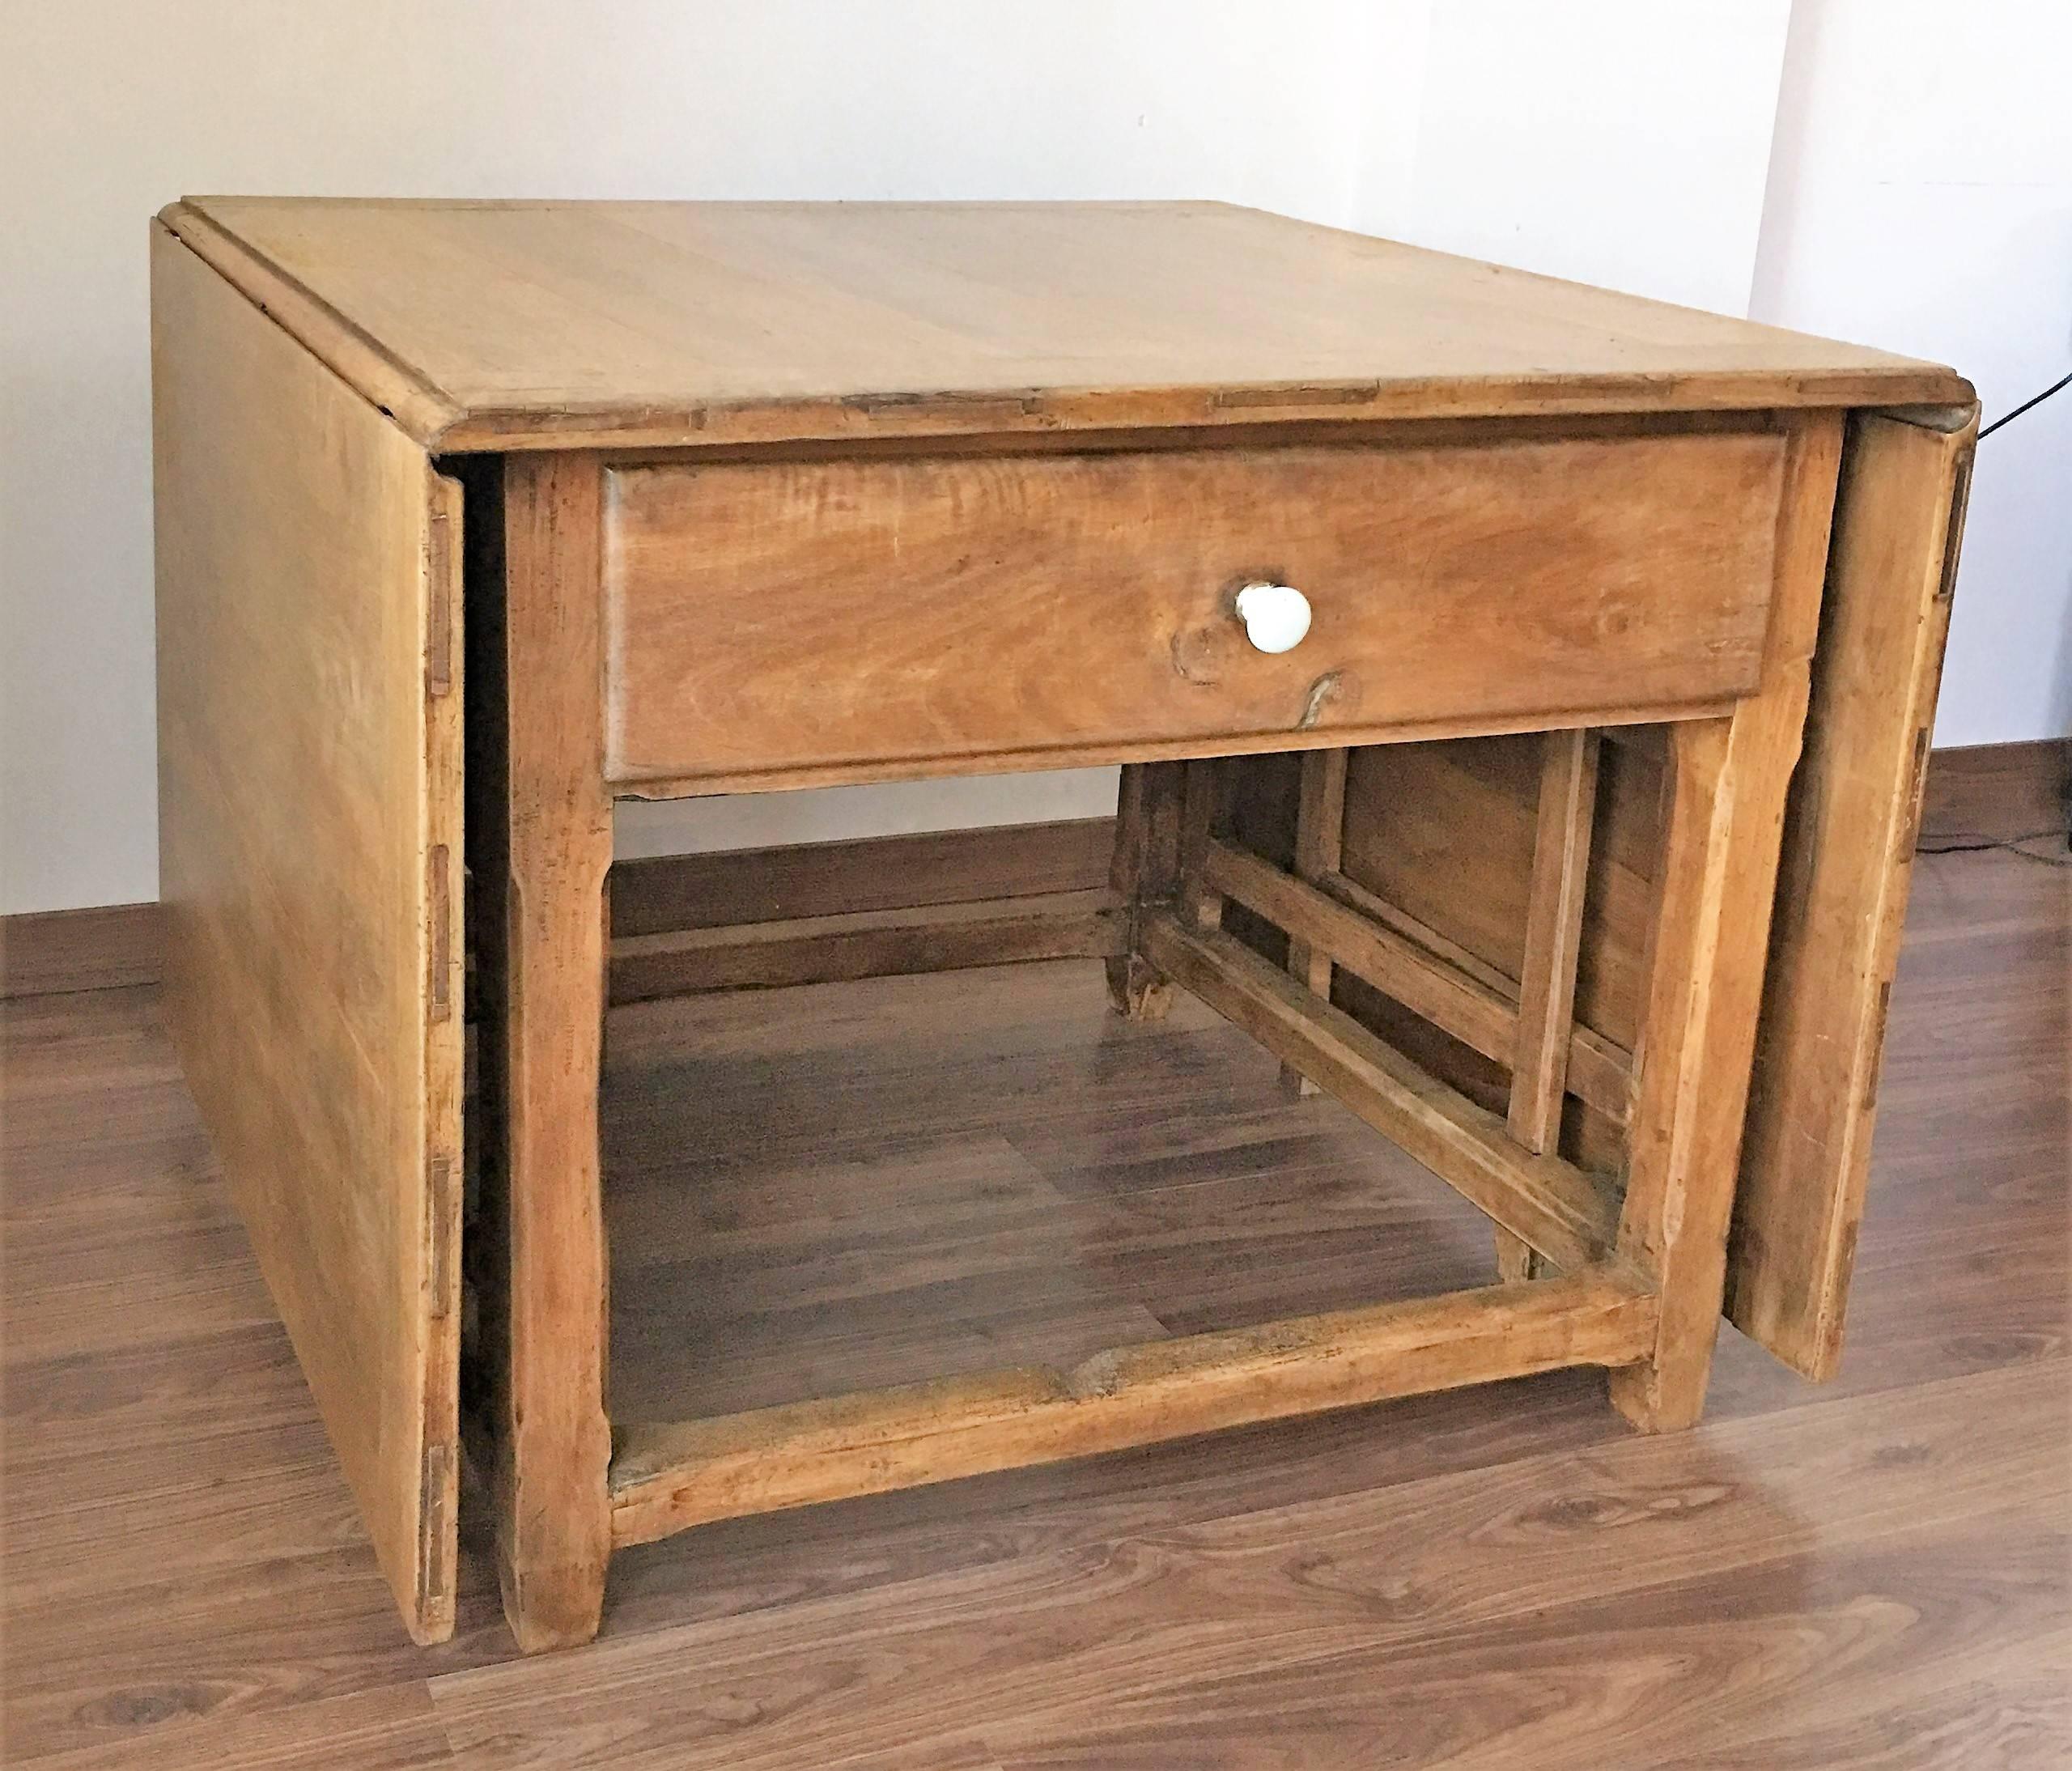 Drop-leaf table with gate-legs. This 18th century, Spanish rustic farmhouse style table features two drop leaves, gate legs, and three drawers with its original ceramic pull.
The wood it´s blonde walnut.
Completely restored.

Measurements:
H